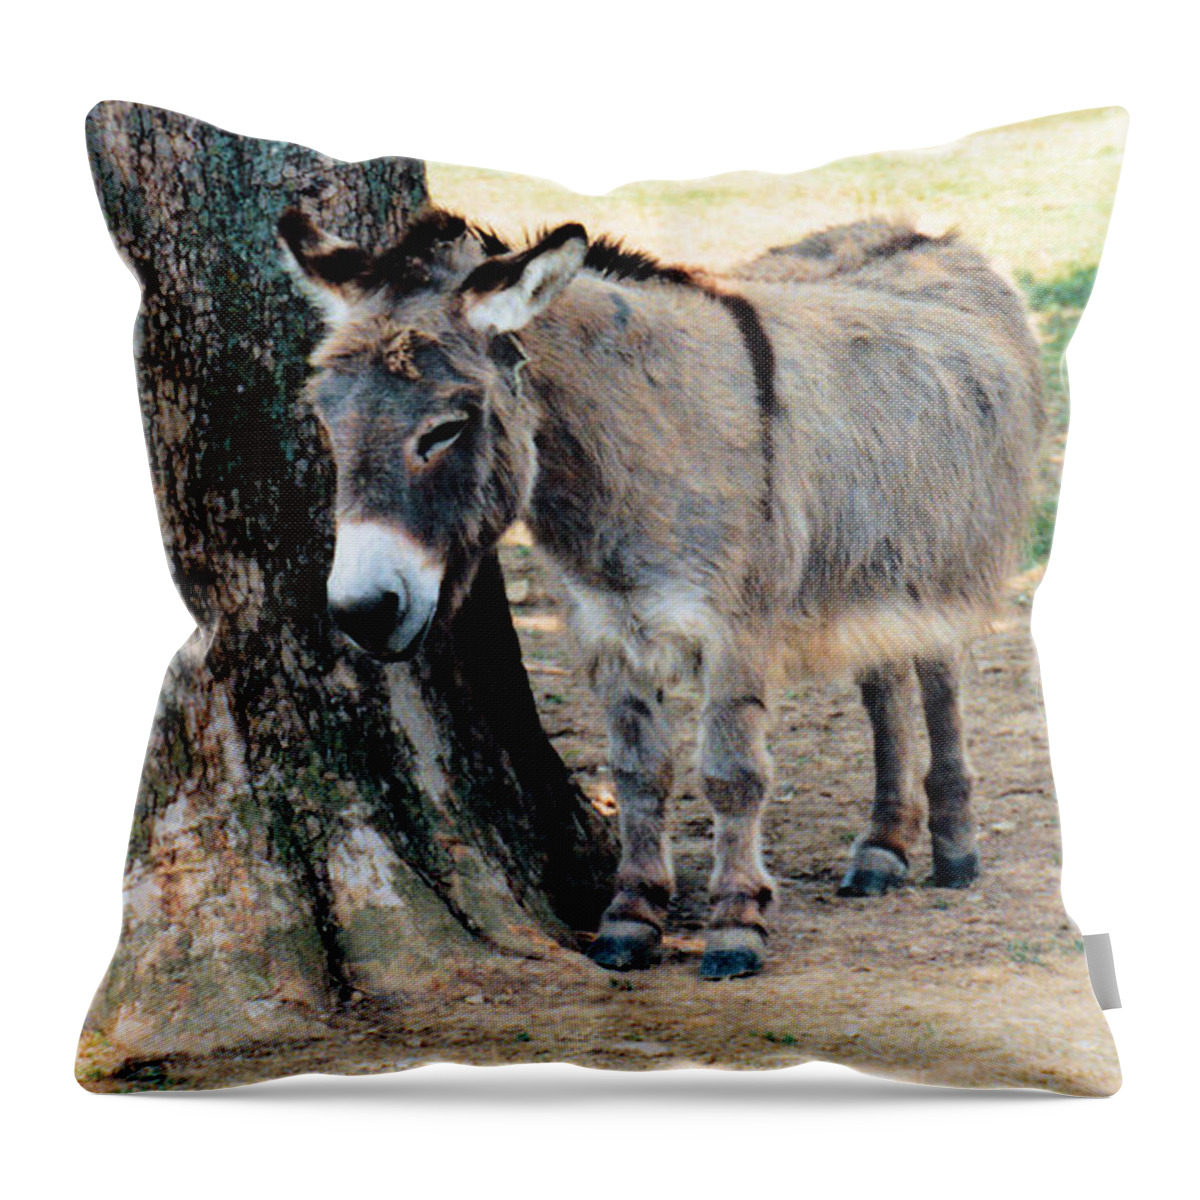 Animals Throw Pillow featuring the photograph Sleepy Sardarian by Jan Amiss Photography